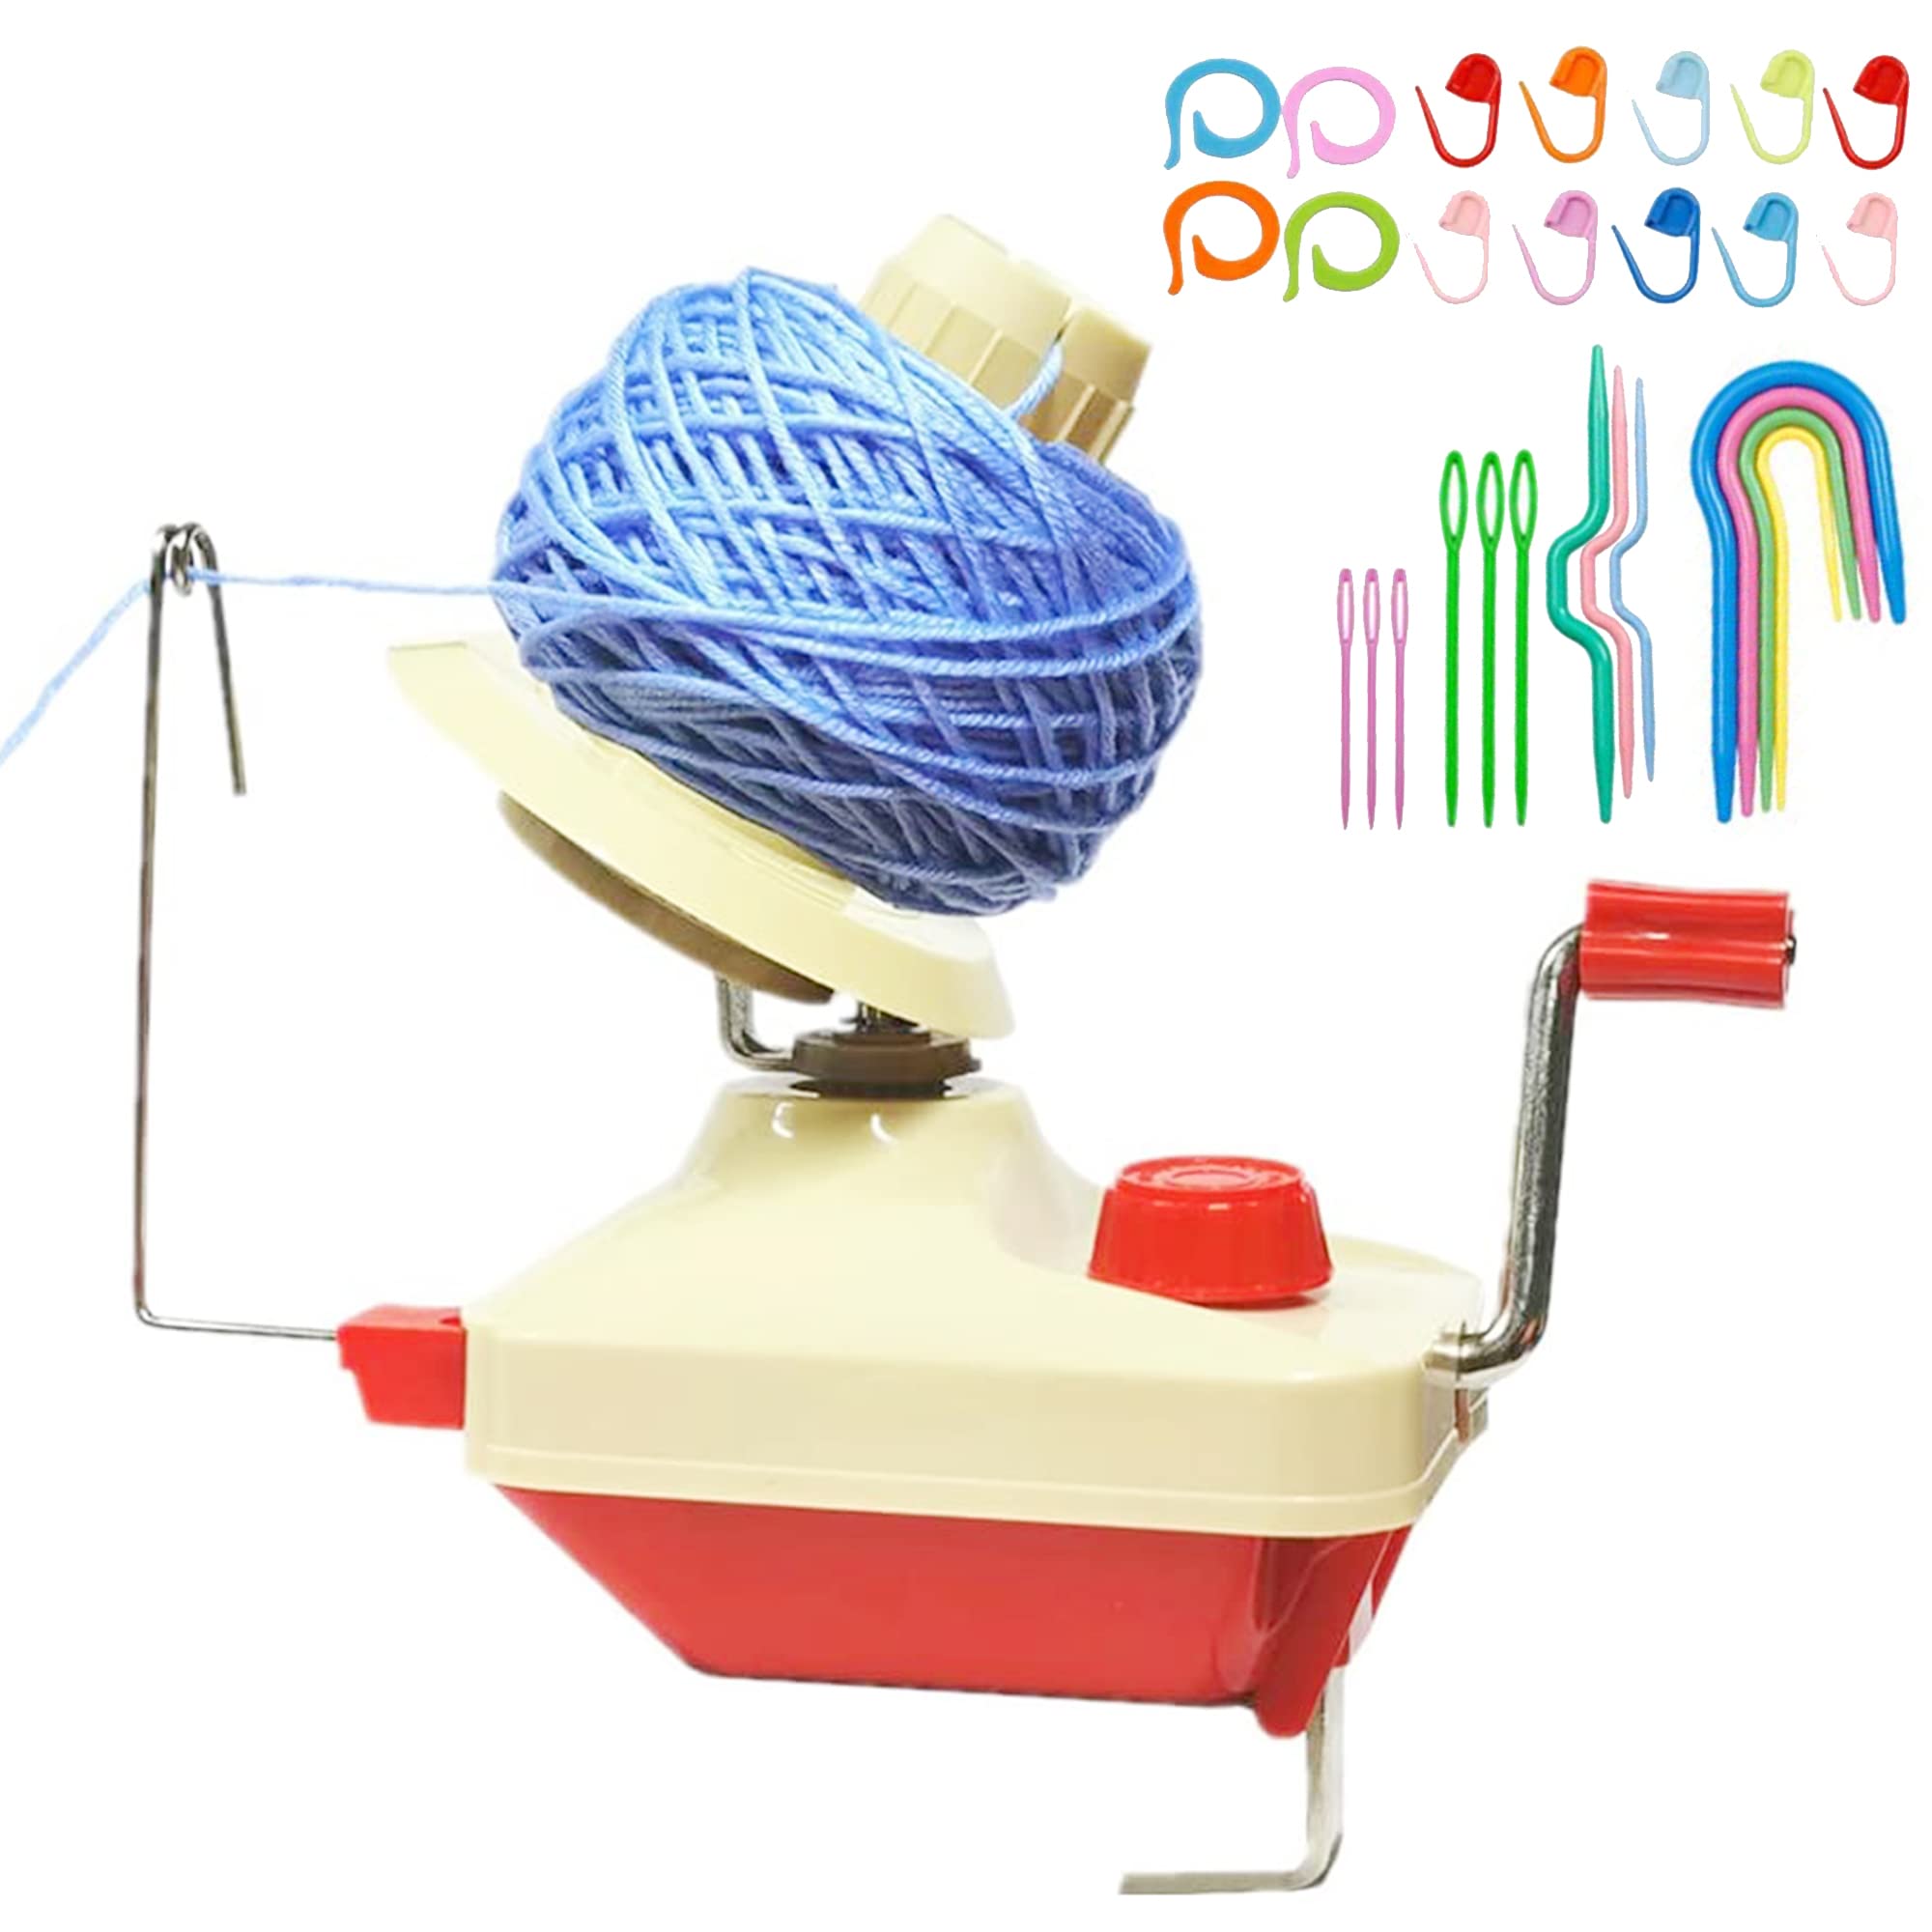 Best Deal for Yarn Ball Winder - Manual Hand Operated Roll String Yarn